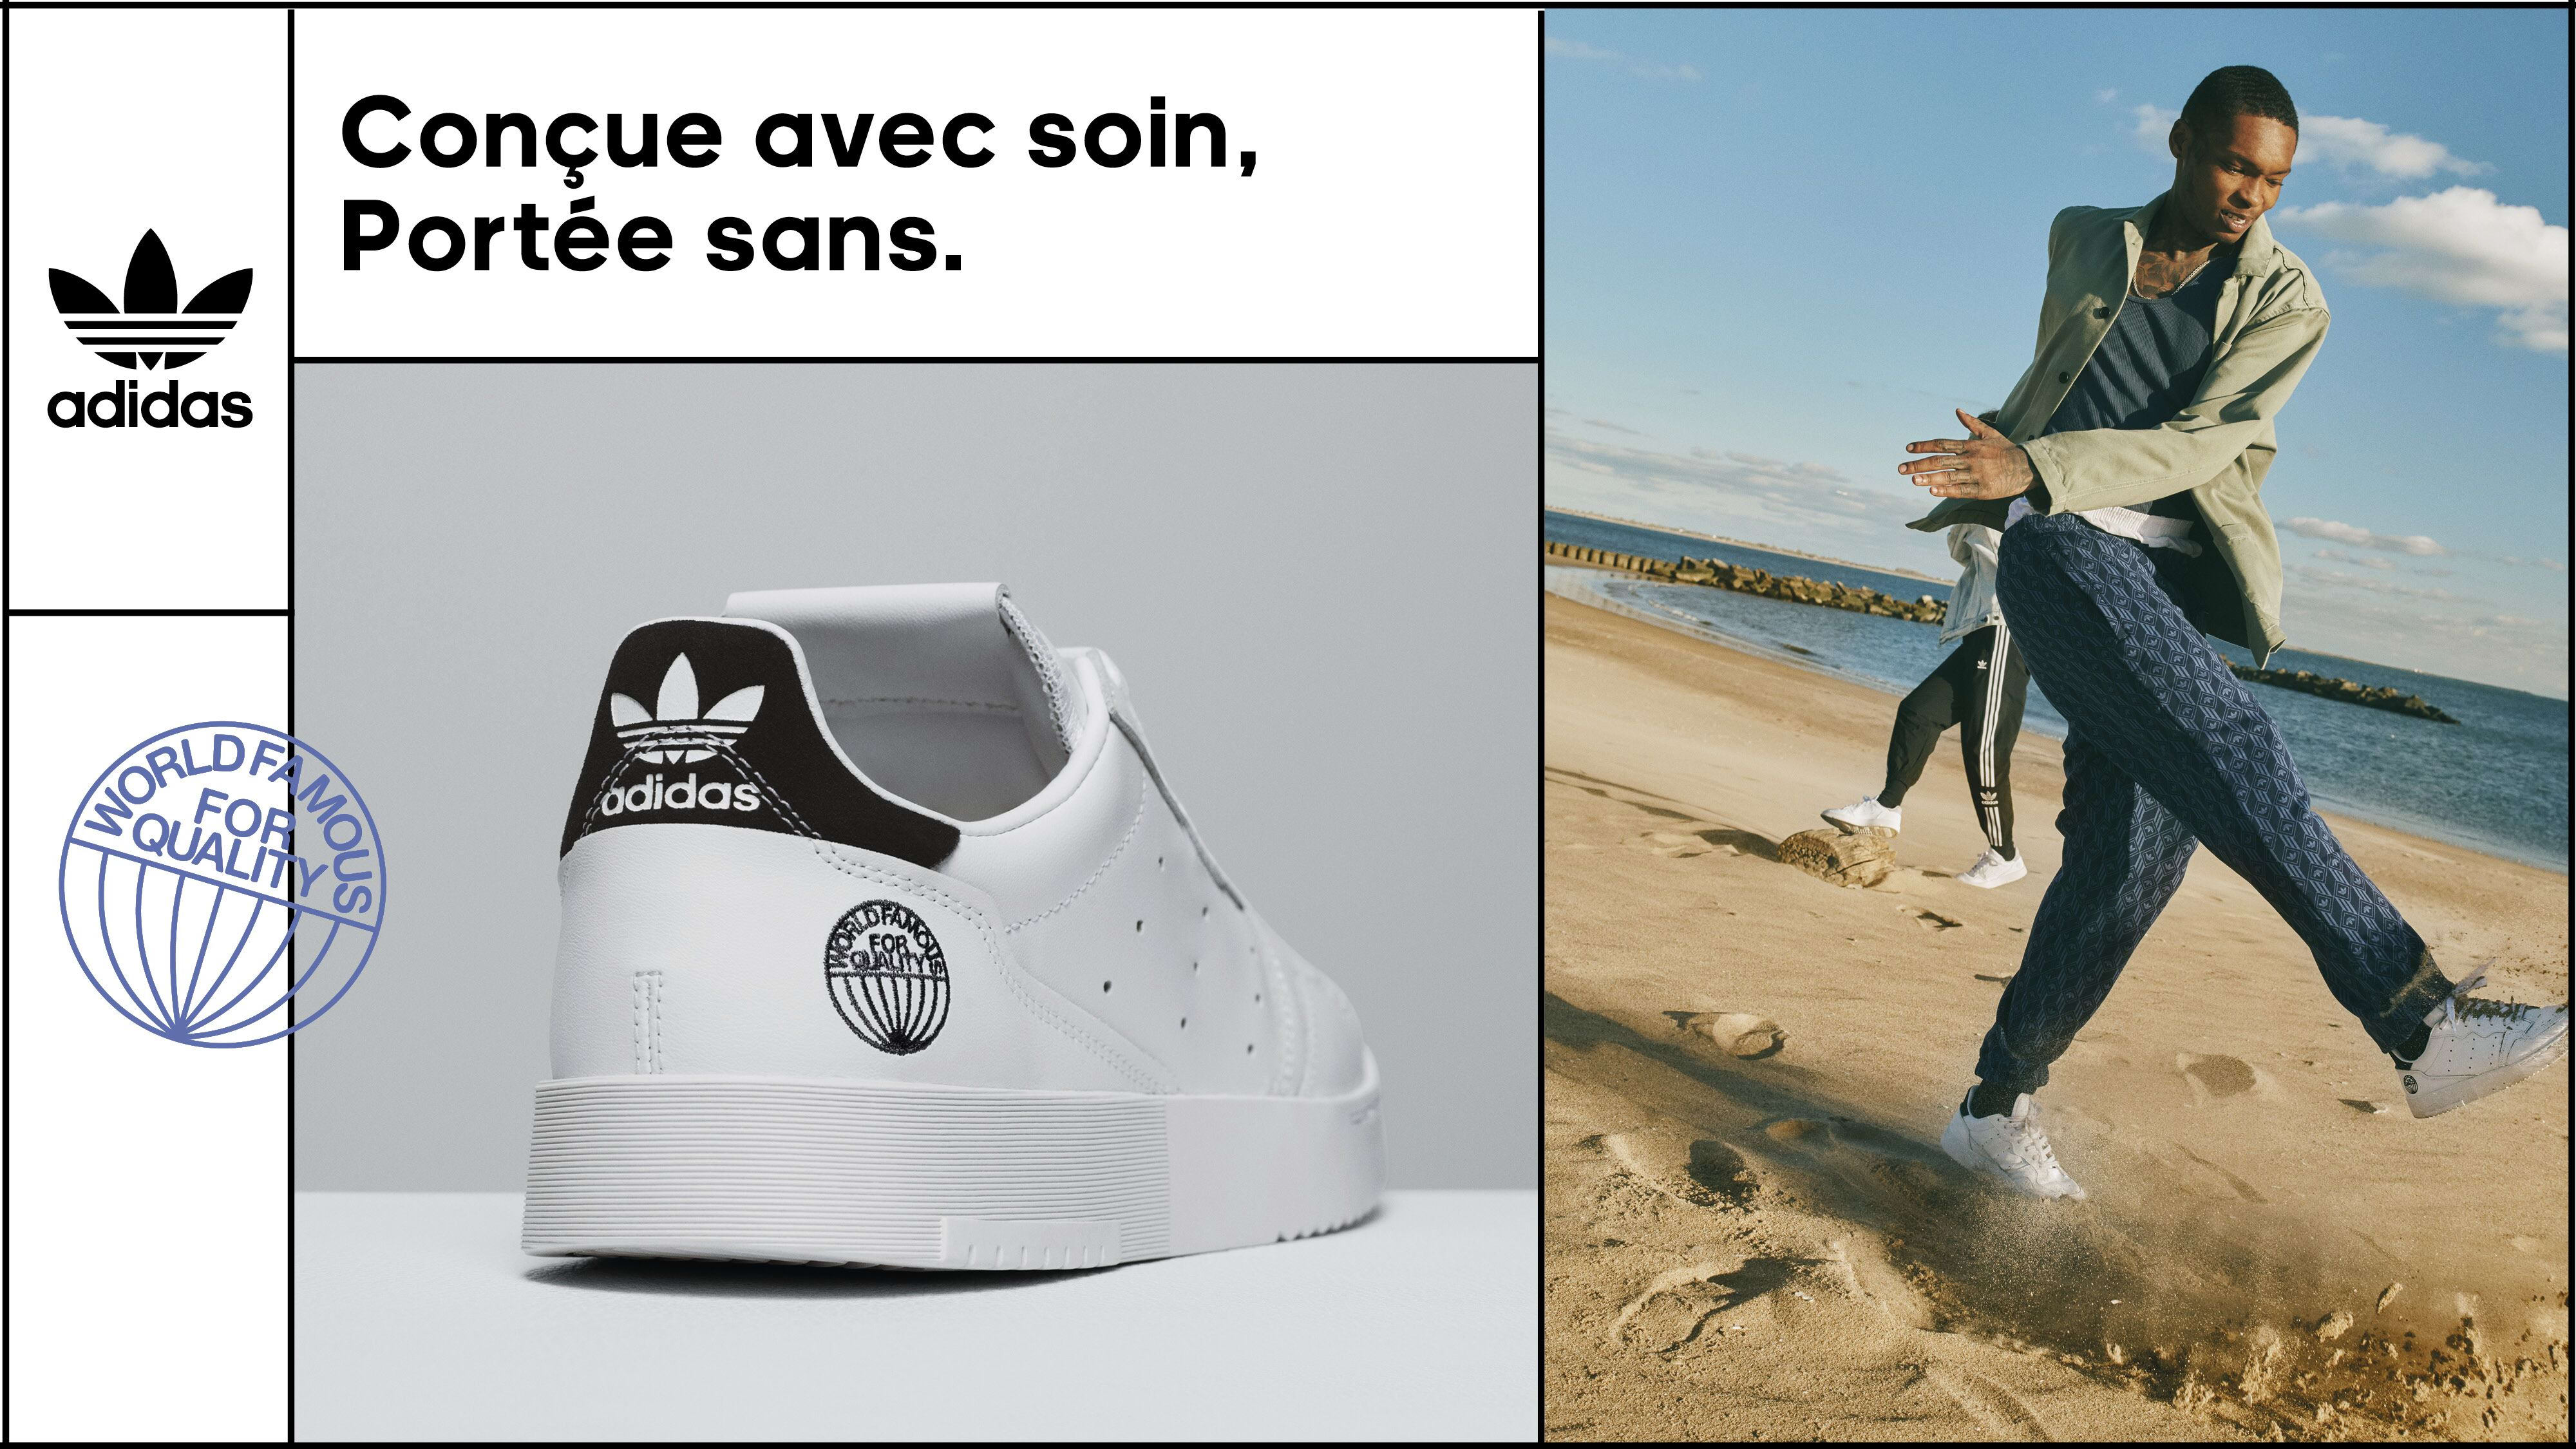 magasin adidas laval